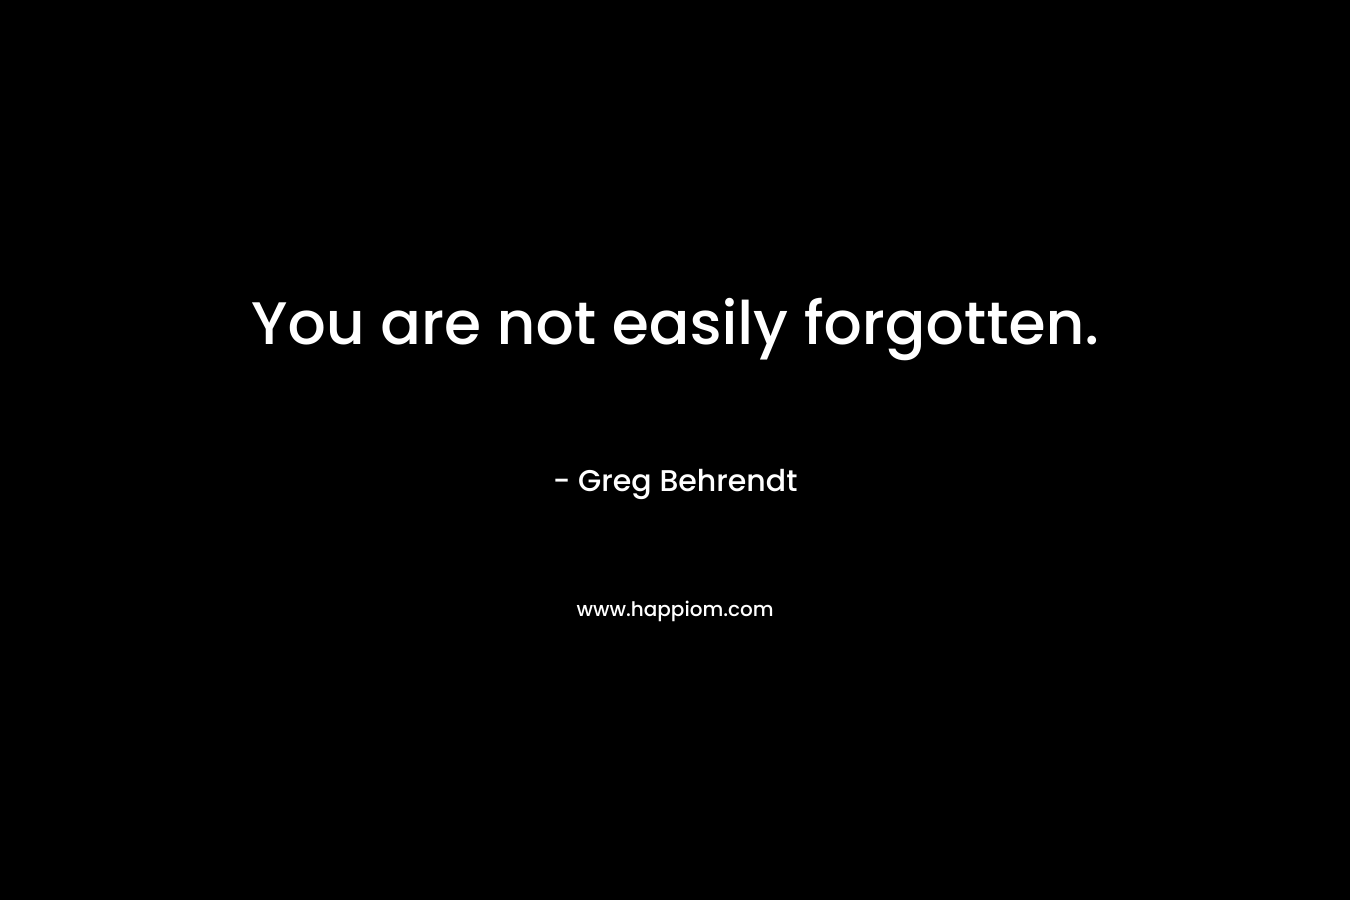 You are not easily forgotten. – Greg Behrendt